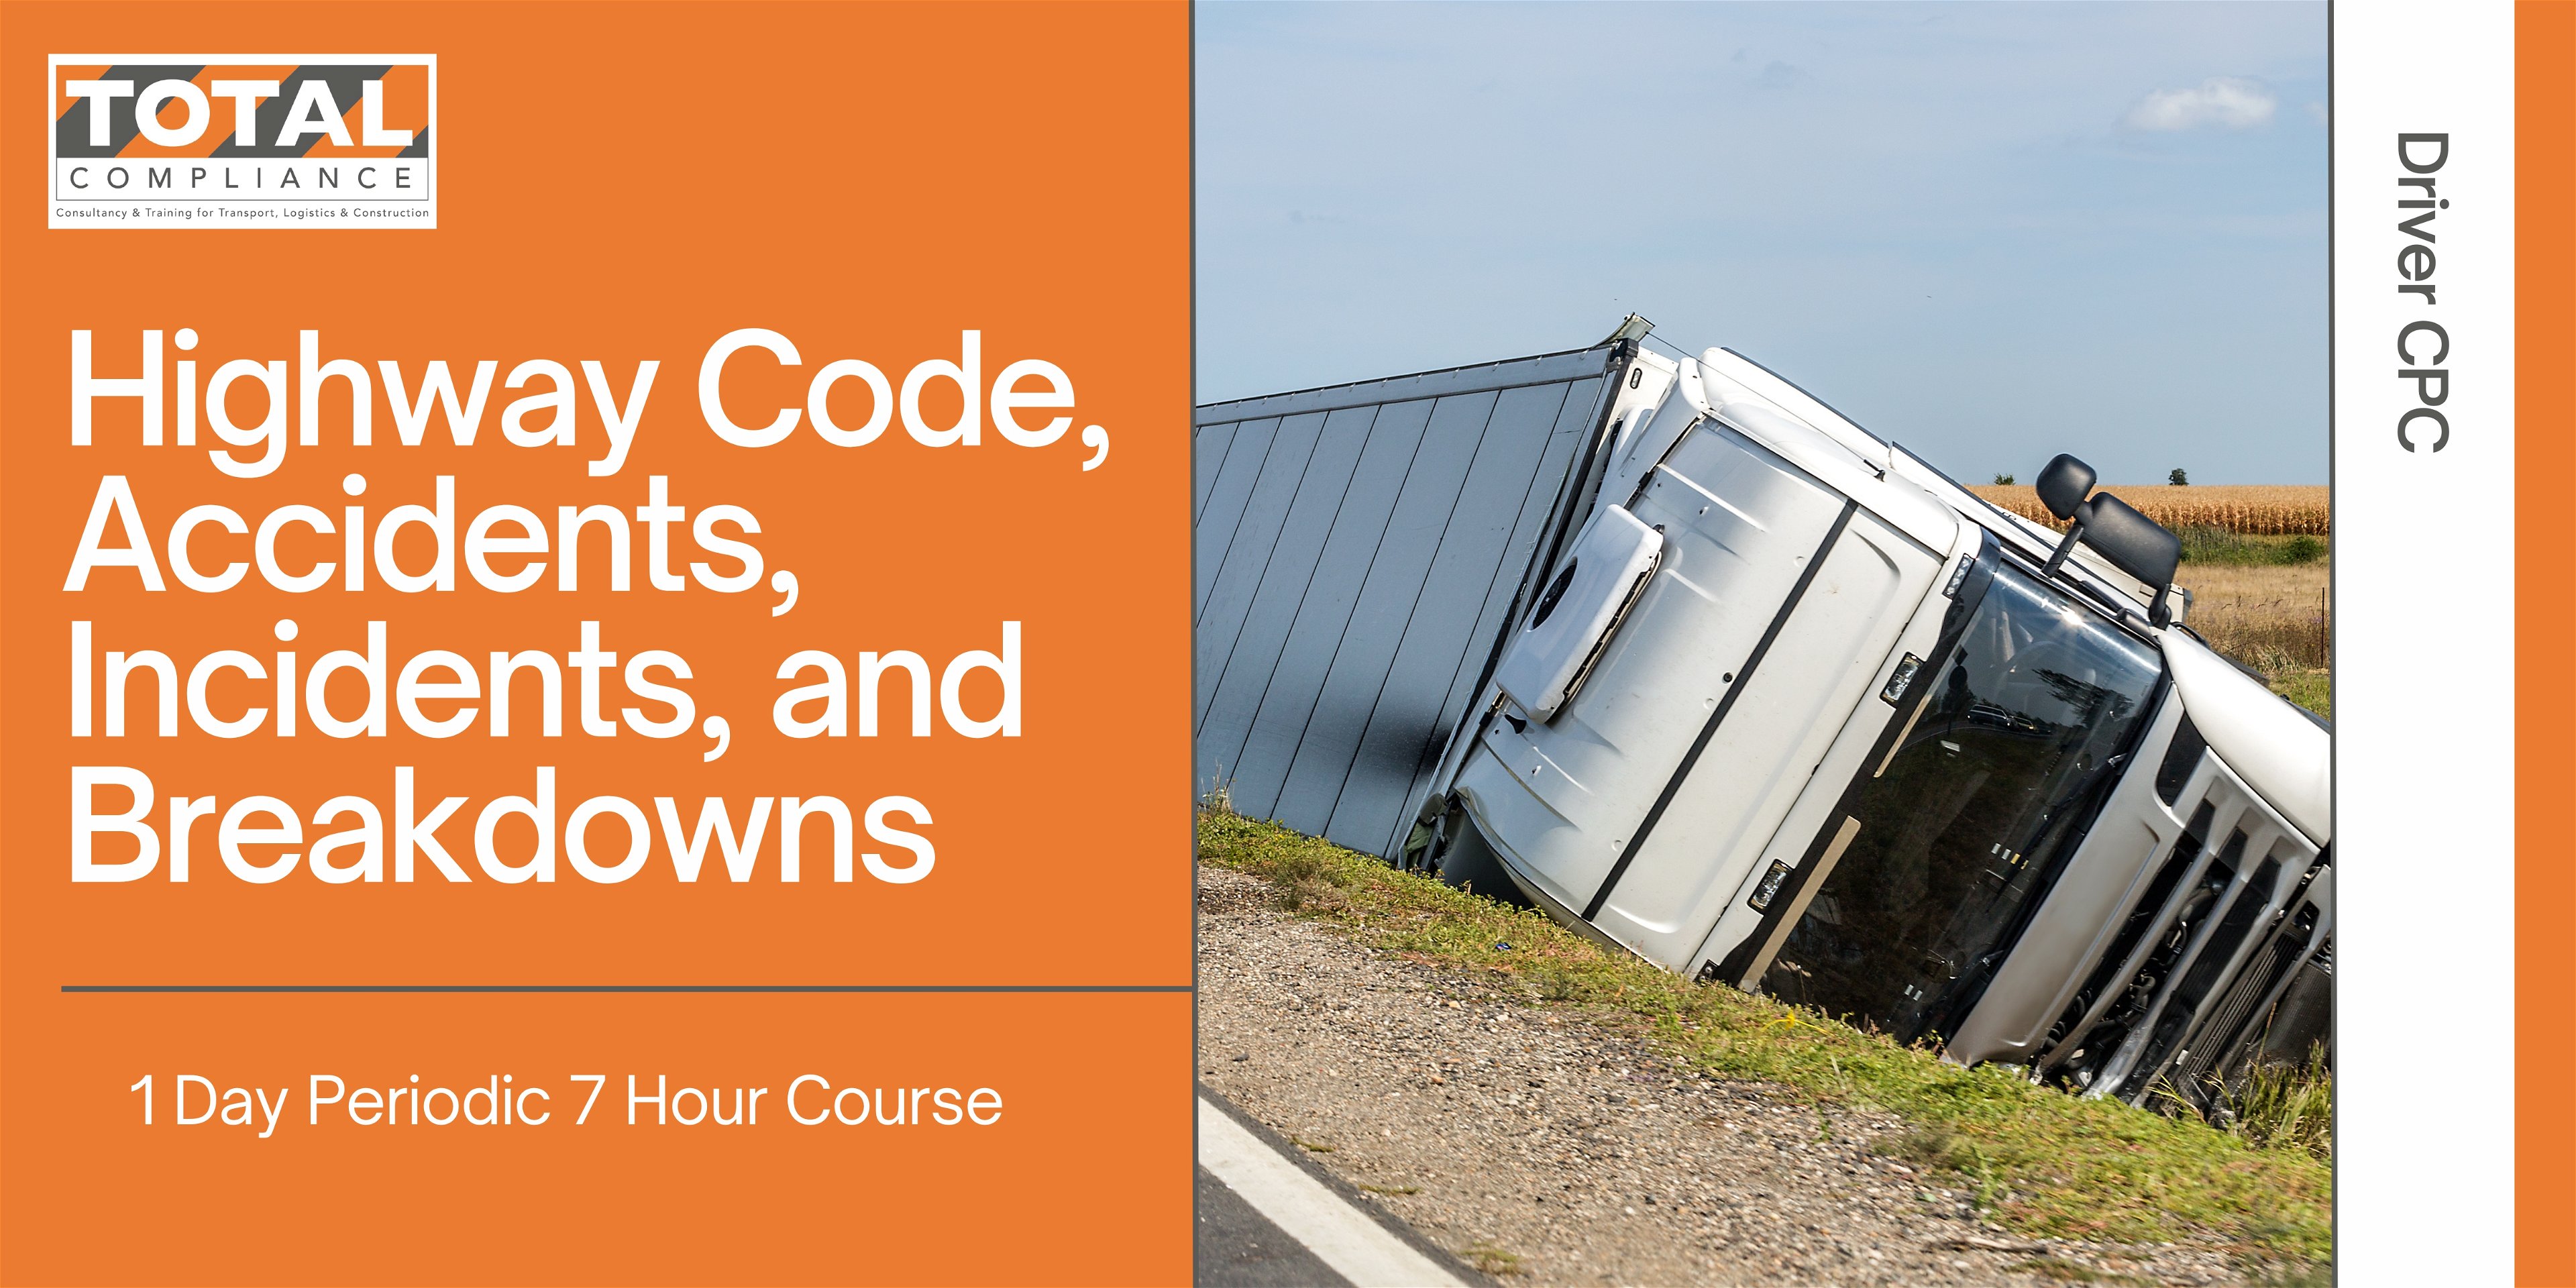 Driver CPC - 1 Day Periodic 7 Hour Course/ Highway Code, Accidents, Incidents, and Breakdowns